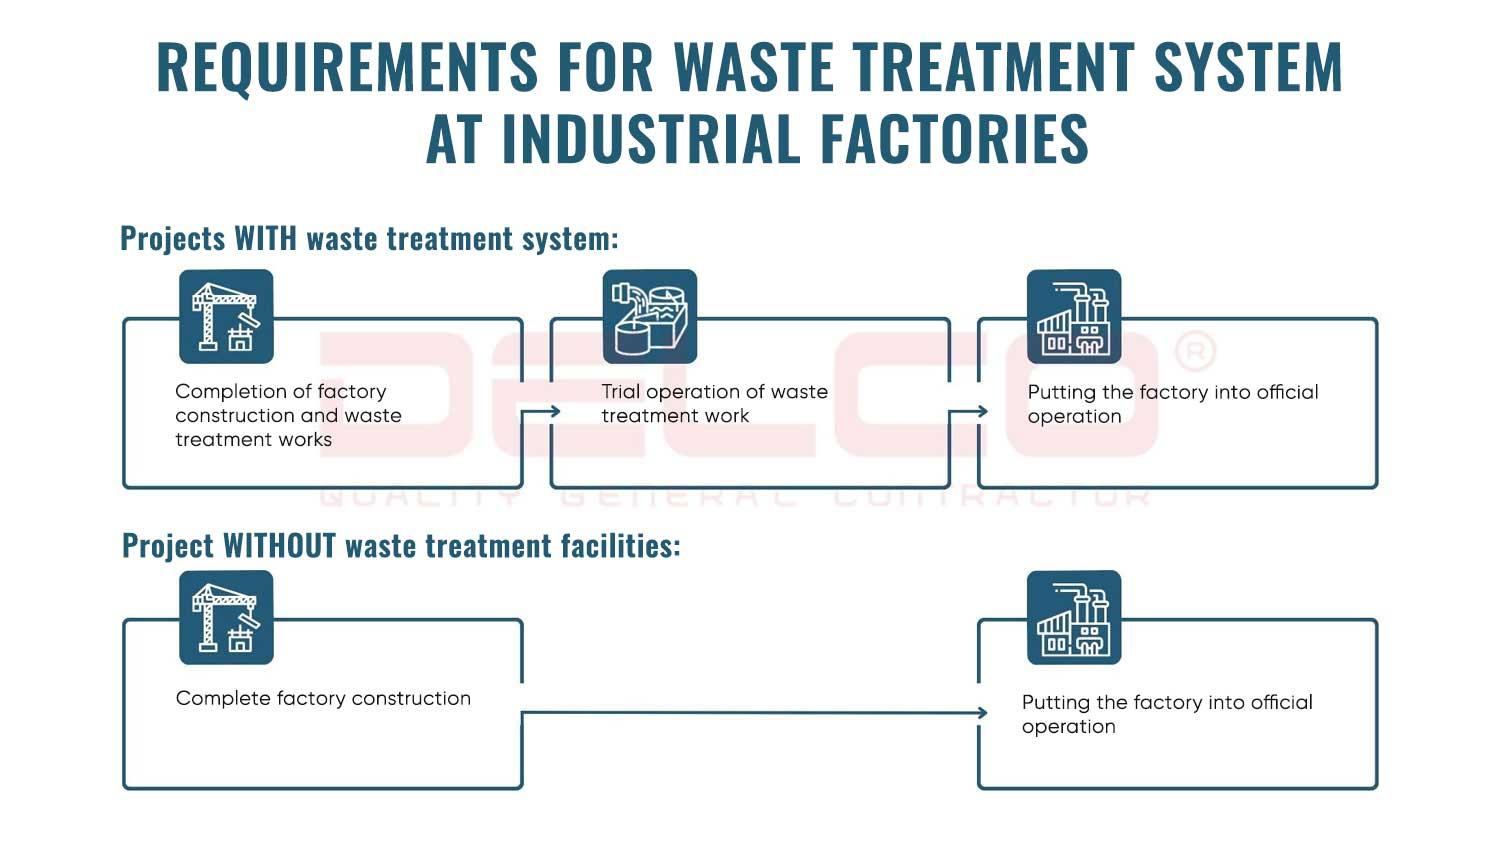 Requirements for waste treatment system at industrial factories